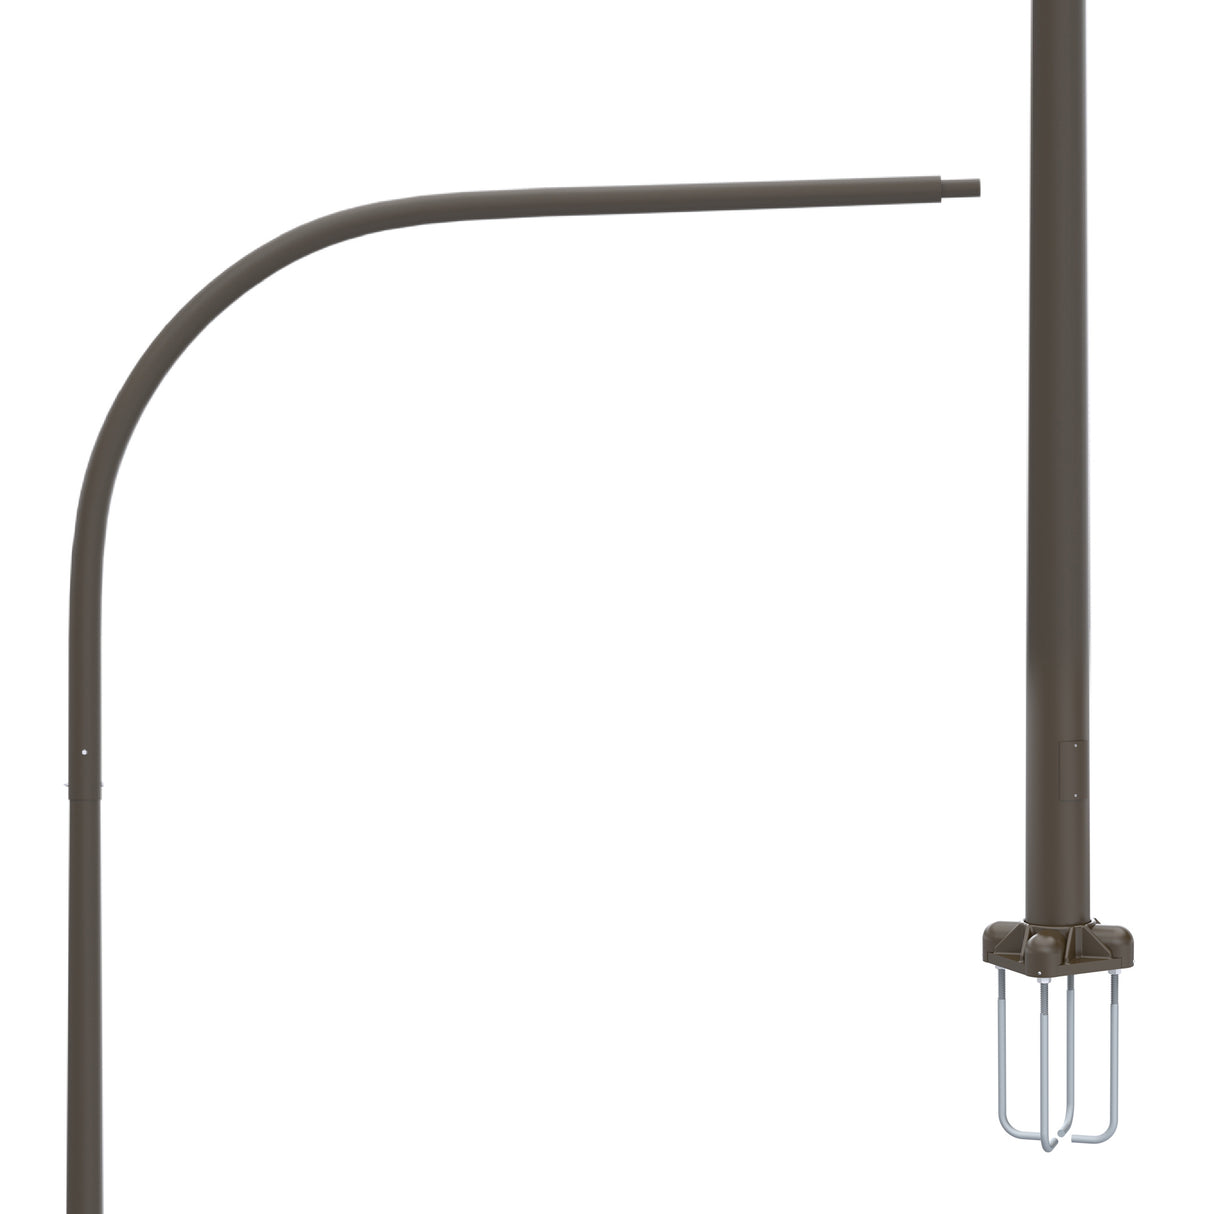 30' Tall x 8.0" Base OD x 4.5" Top OD x 0.156" Thick, Round Tapered Aluminum, Anchor Base Light Pole with 10' Davit Arm